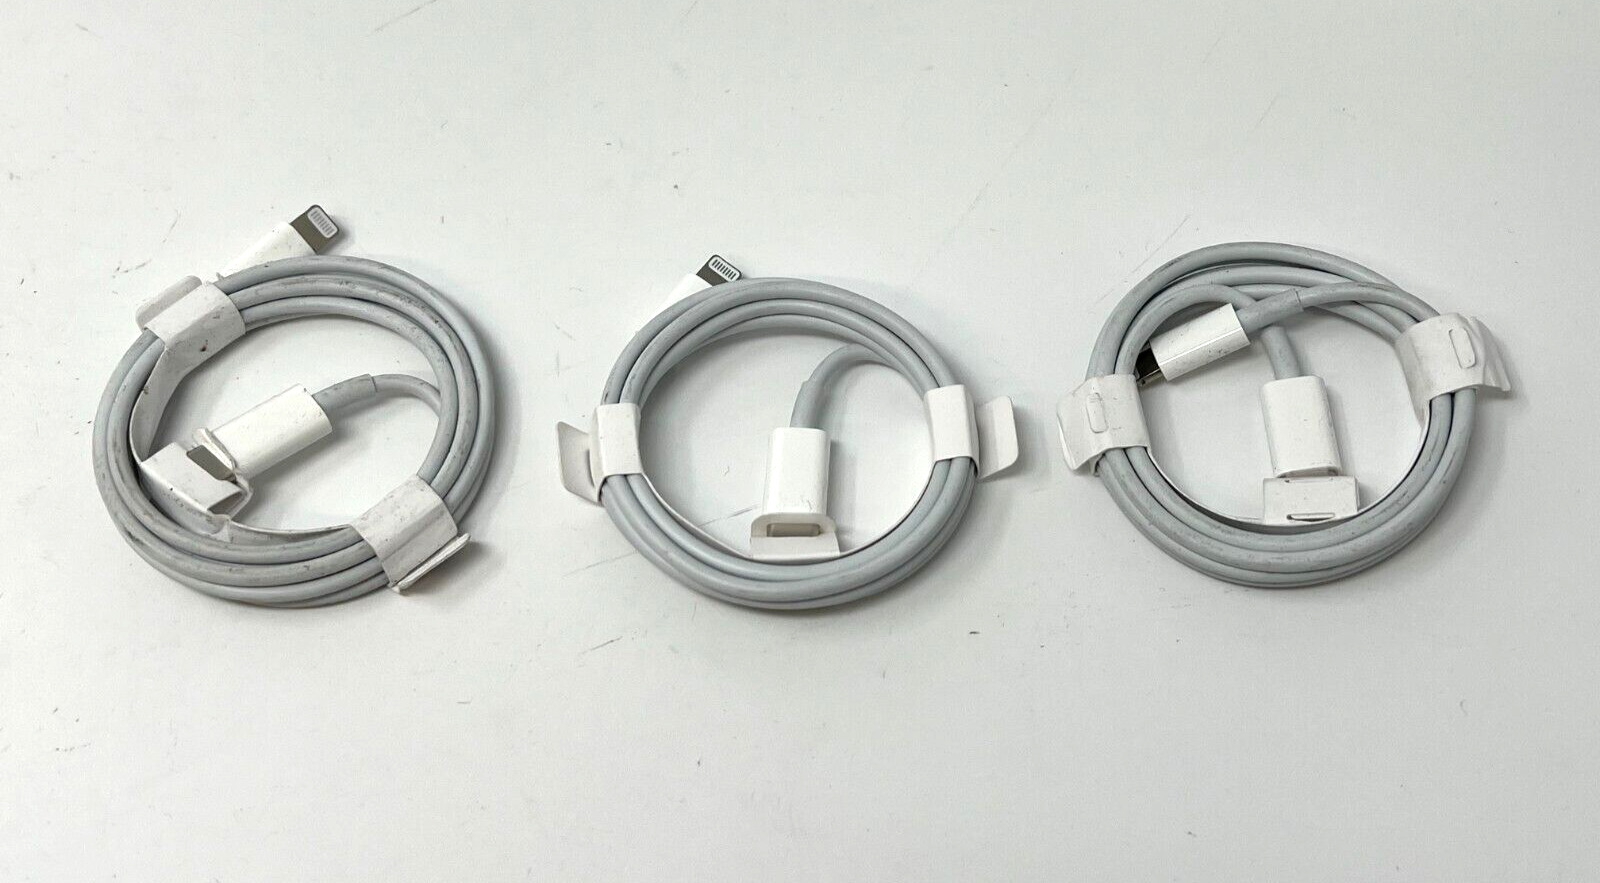 LOT of 3 - GENUINE Apple USB-C to Lightning Charging Cable 1m MM0A3AM/A - No Box